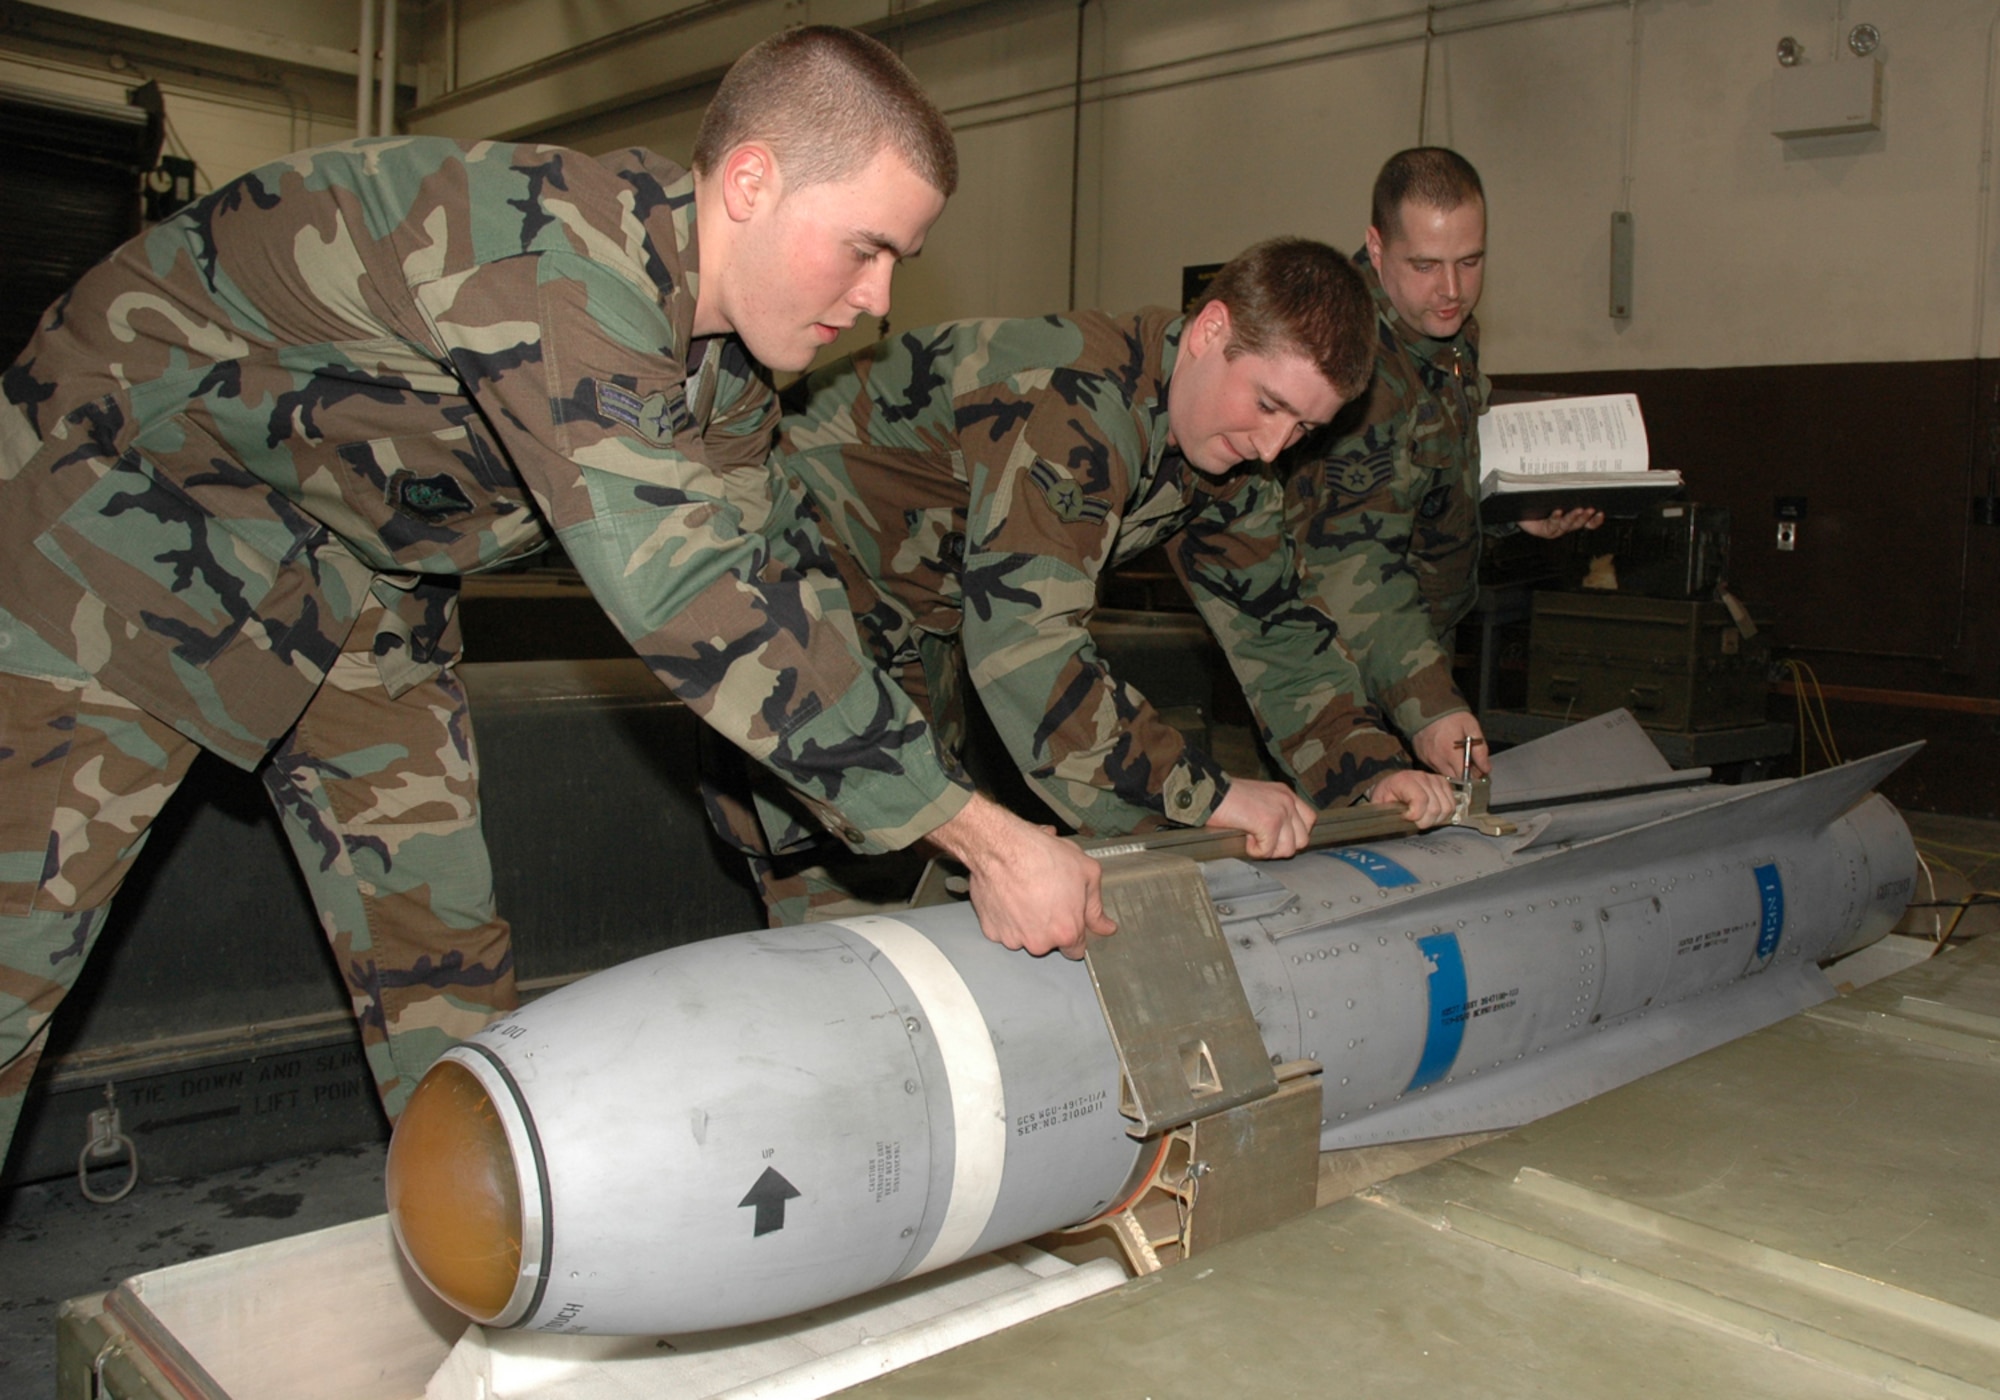 OSAN AIR BASE, Republic of Korea --  Airmen 1st Class Mark Stoia and Justin Simmons pull a Training Guided Missile-65D out of "the can" for an inspection as Staff Sgt. David Coughtry goes over technical orders. The three Airmen are with the 51st Munitions Squadron precision guided missiles section. (U.S. Air Force photo by Staff Sgt. Benjamin Rojek)